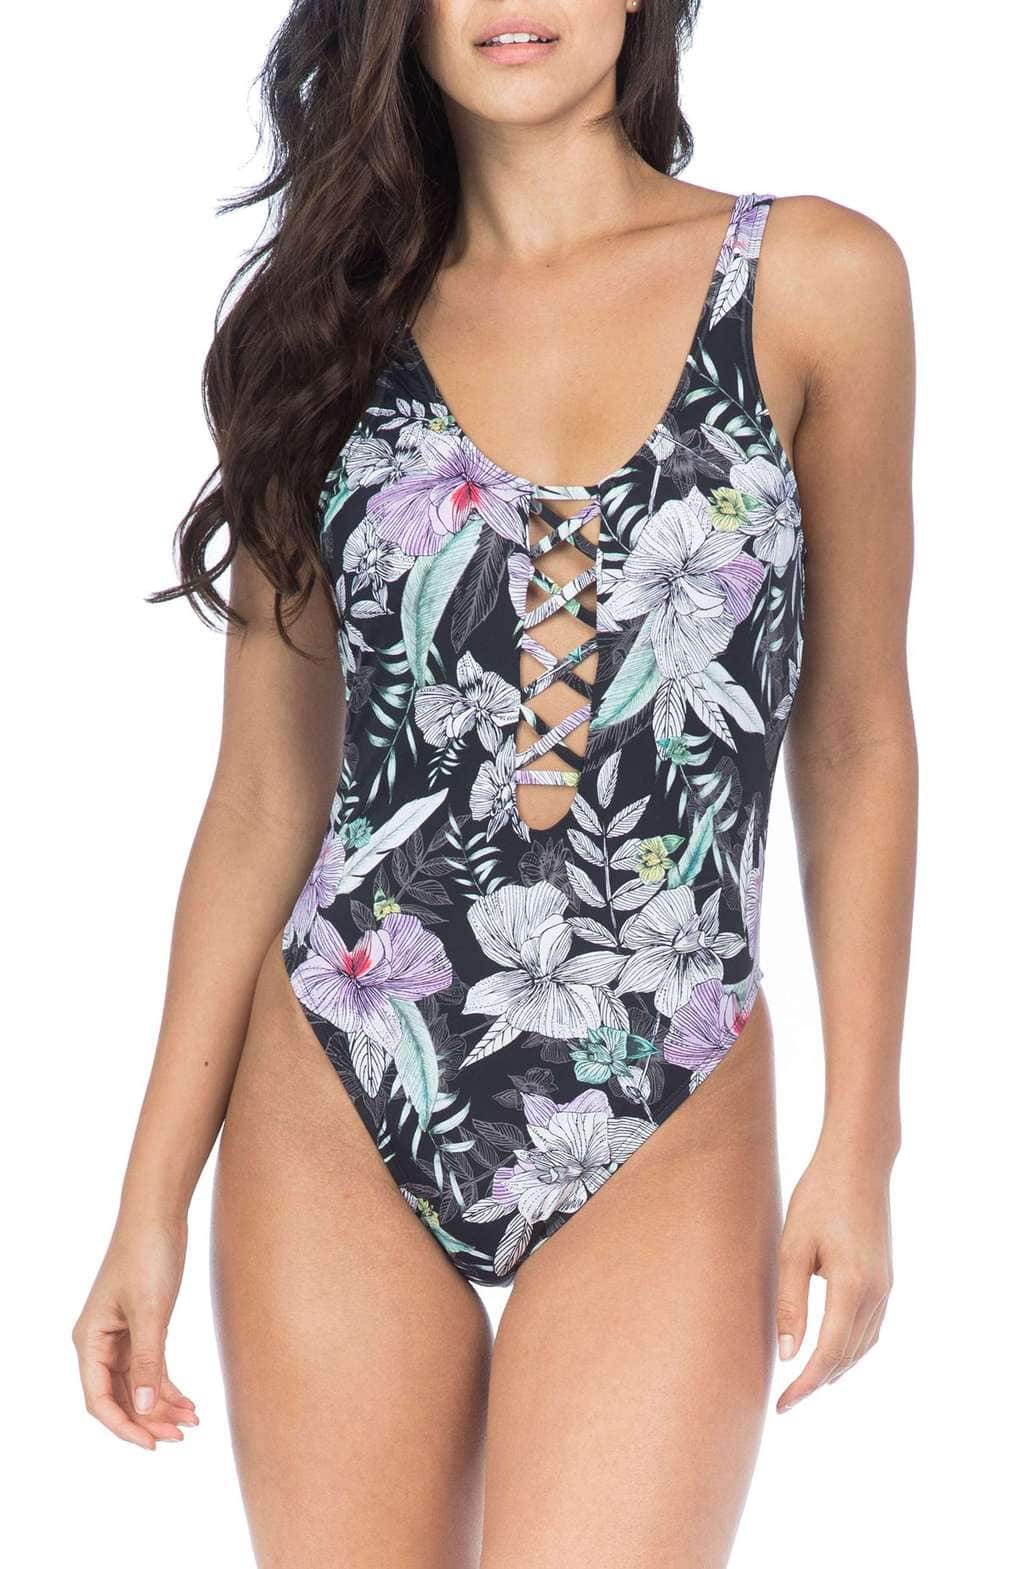 Women's one piece bathing suit from Nordstrom